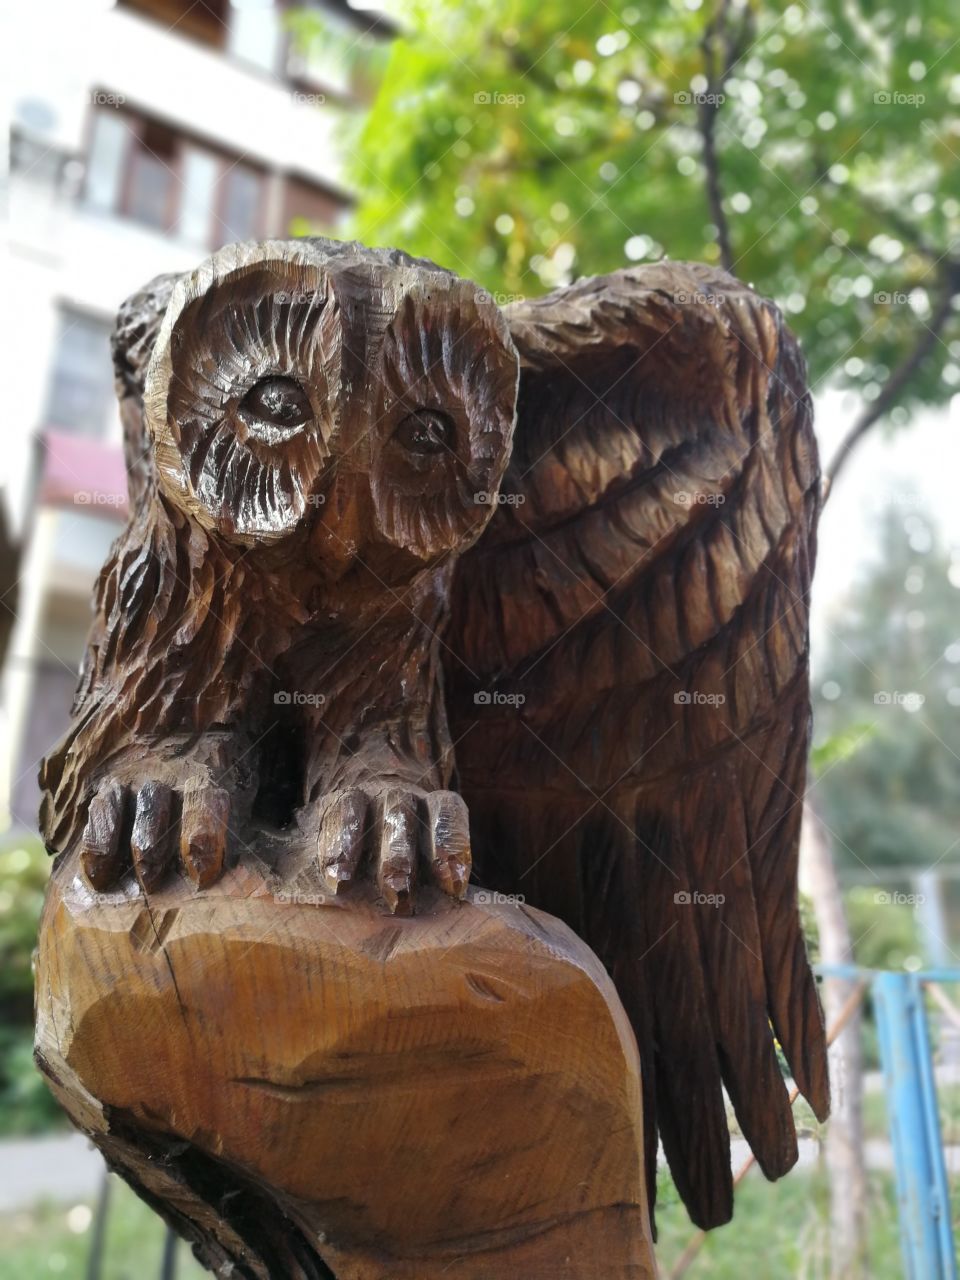 An old wooden owl